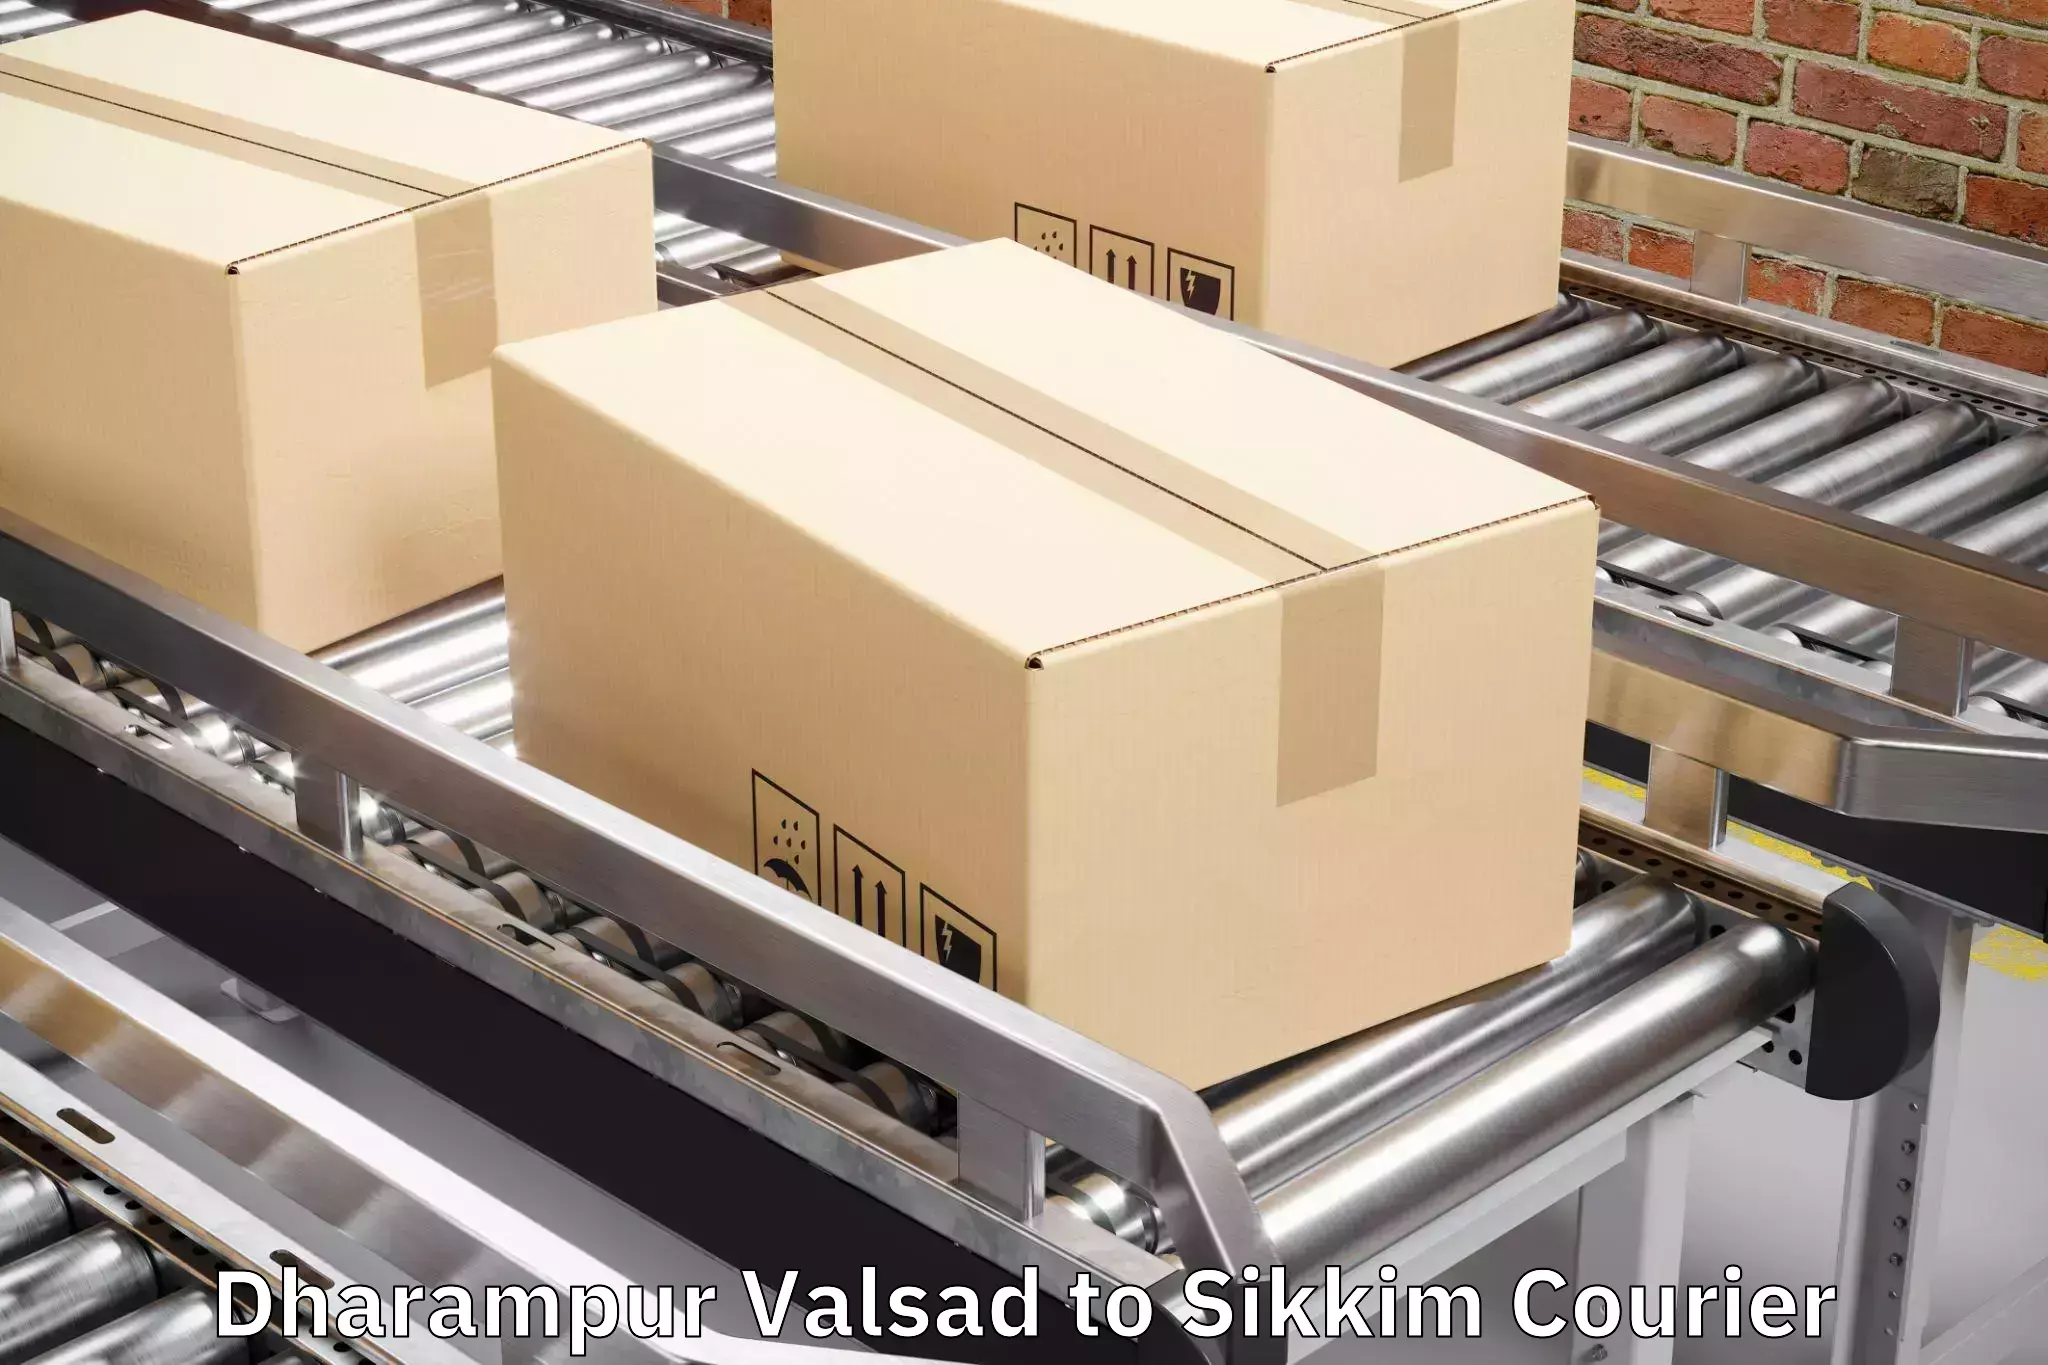 Baggage delivery estimate Dharampur Valsad to Sikkim